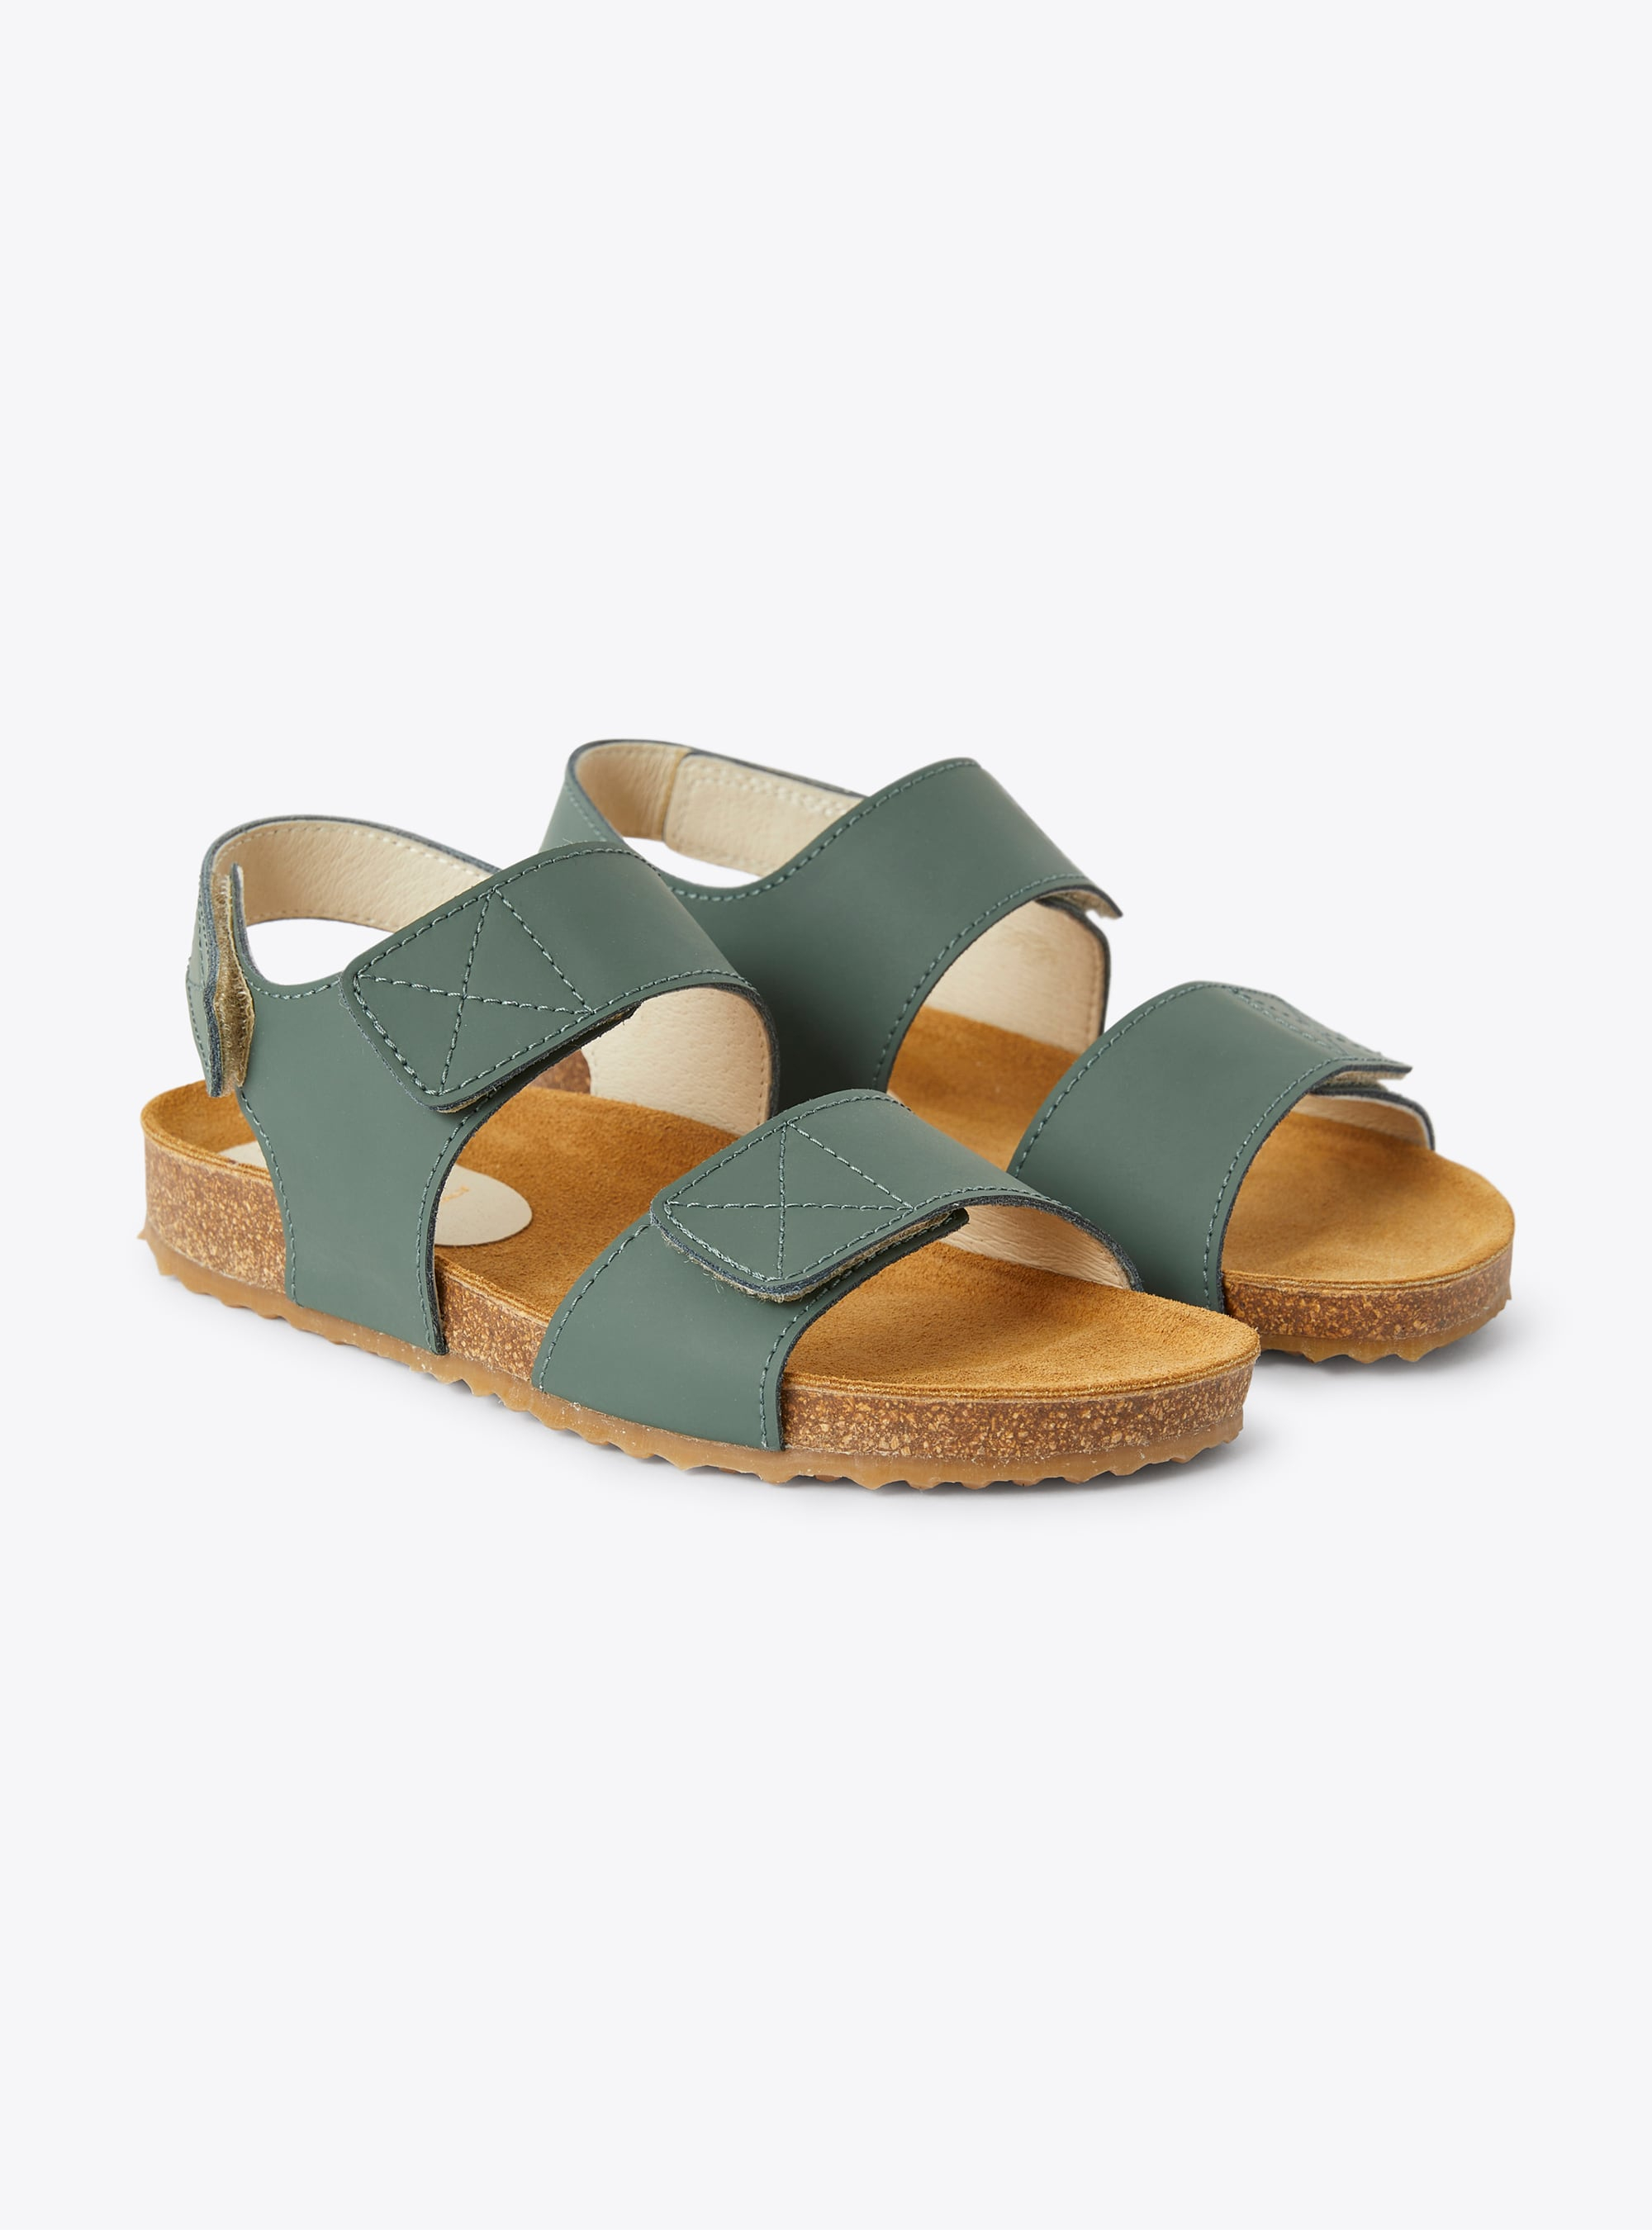 Leather sandal in sage green with double riptape - Shoes - Il Gufo